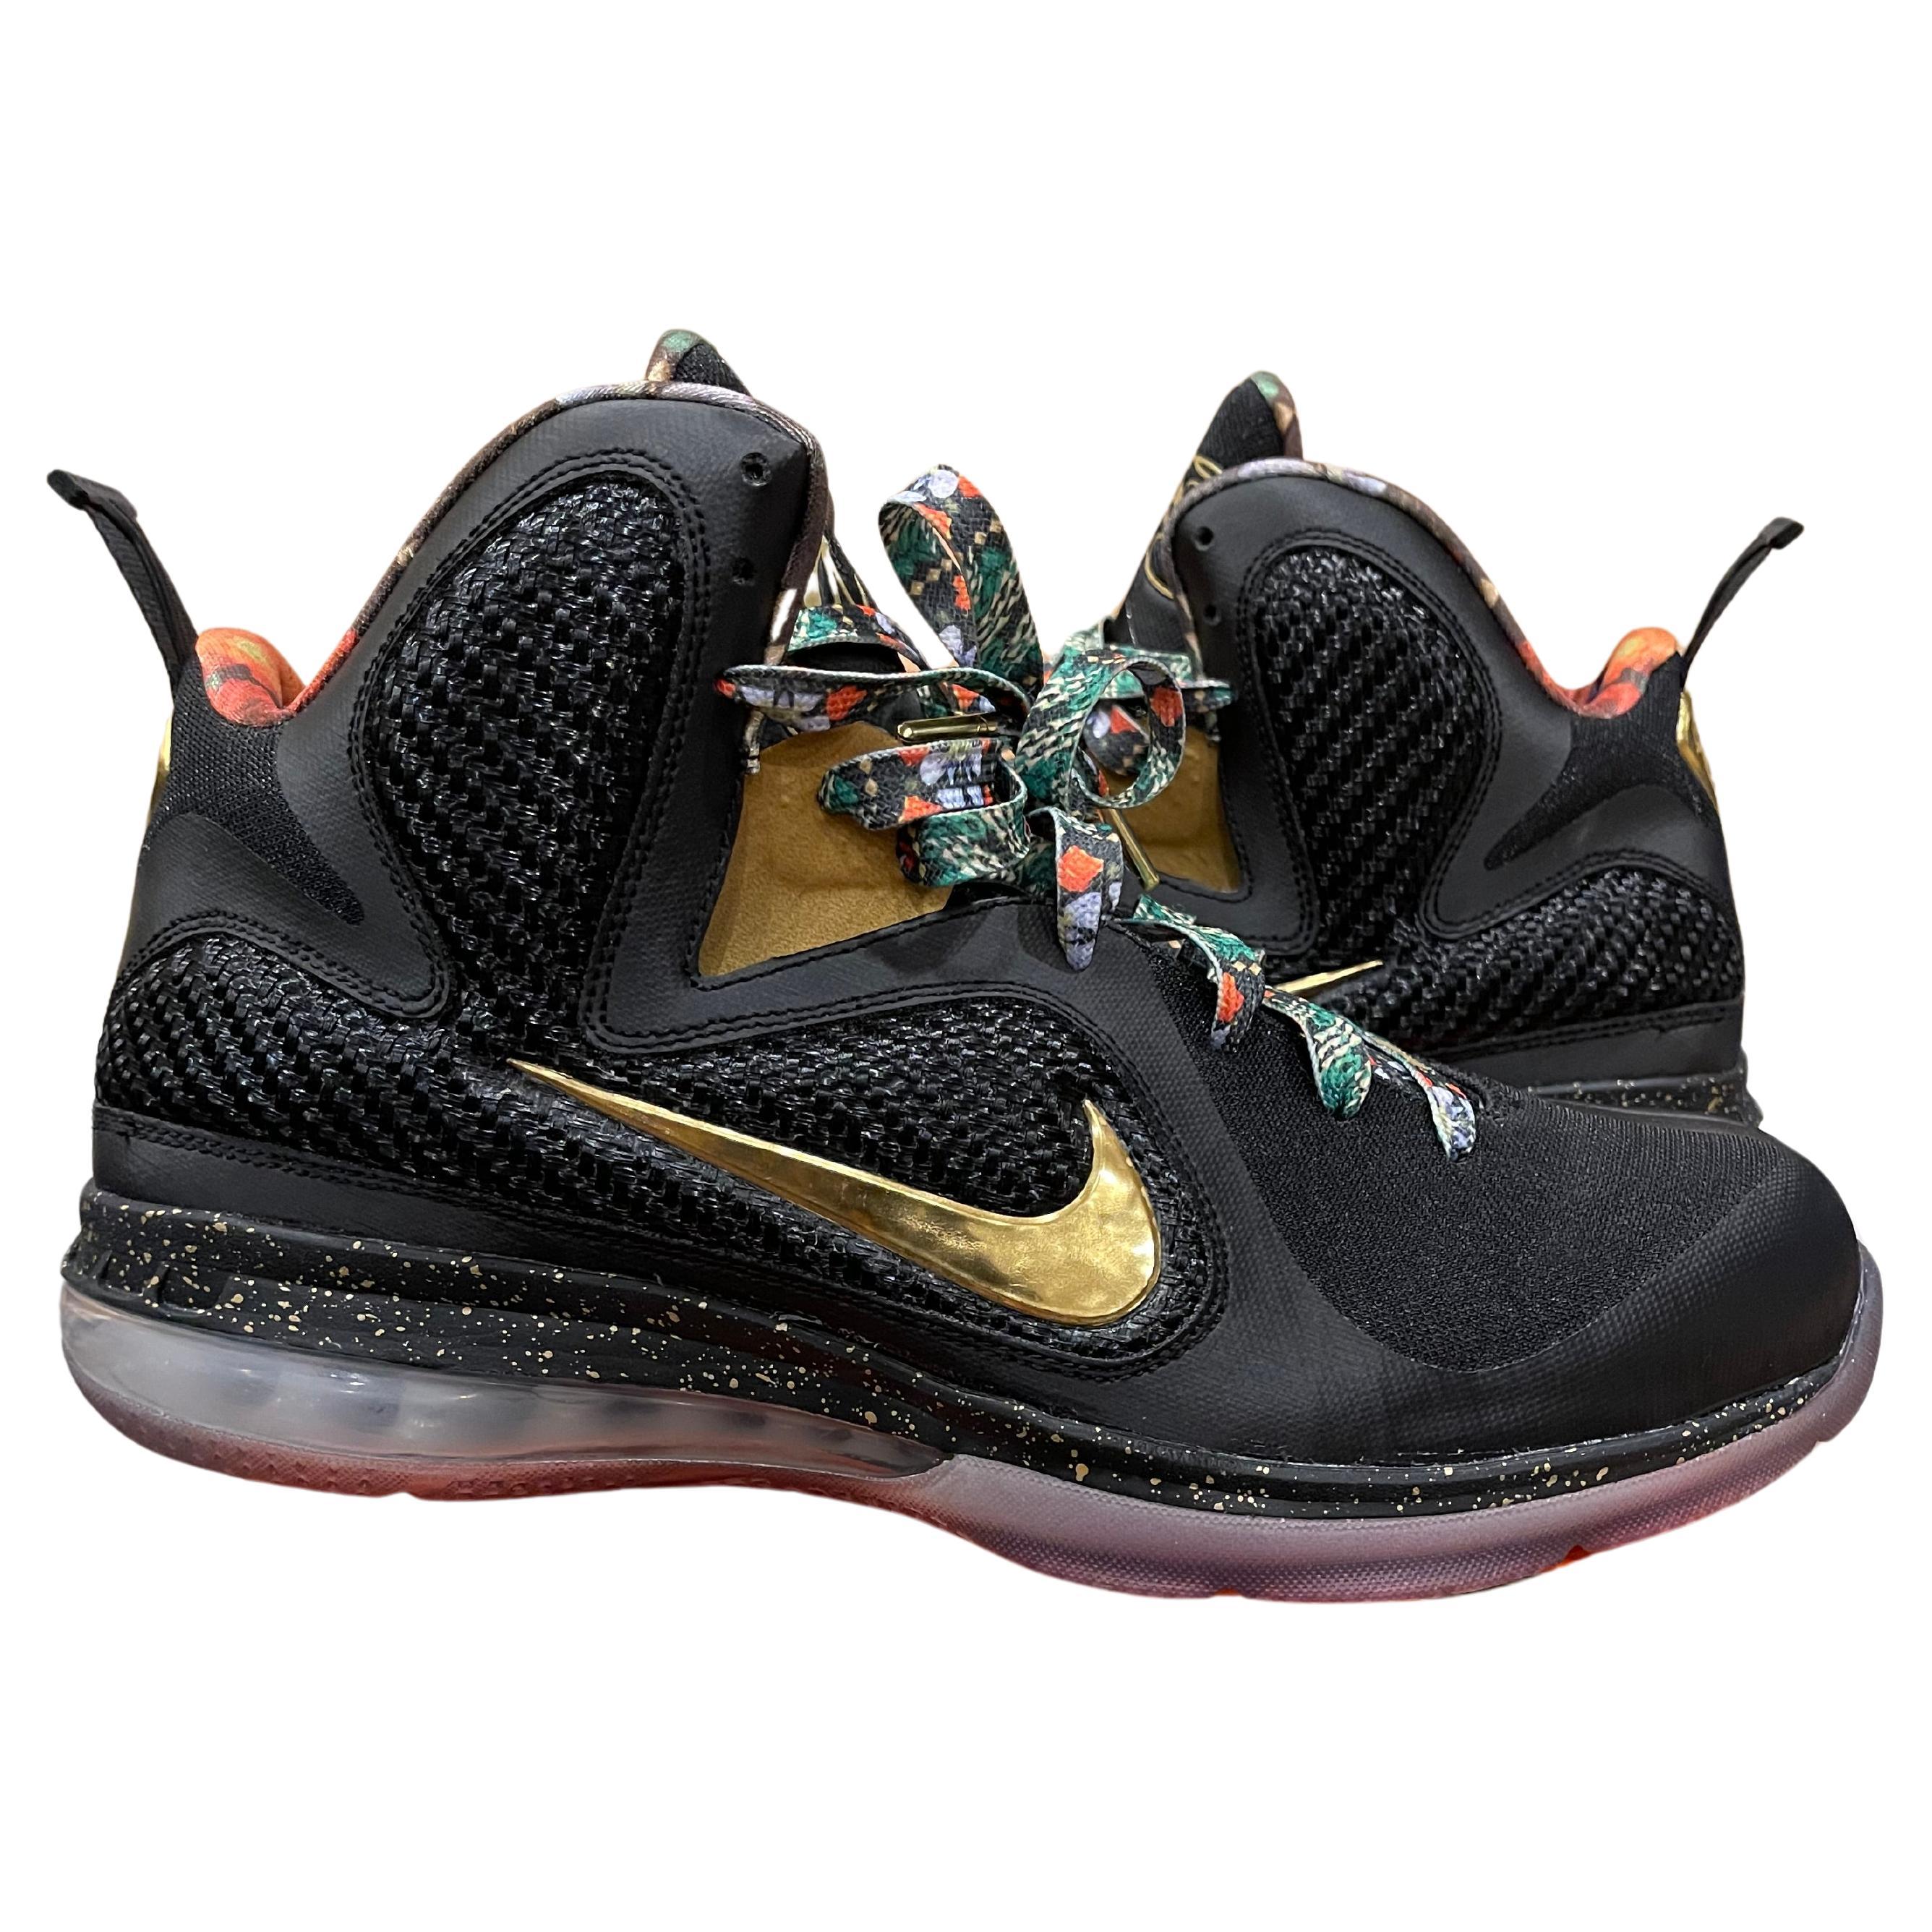 Nike LeBron 9 “Watch the Throne” Promo Sample *RARE* size 11 For Sale